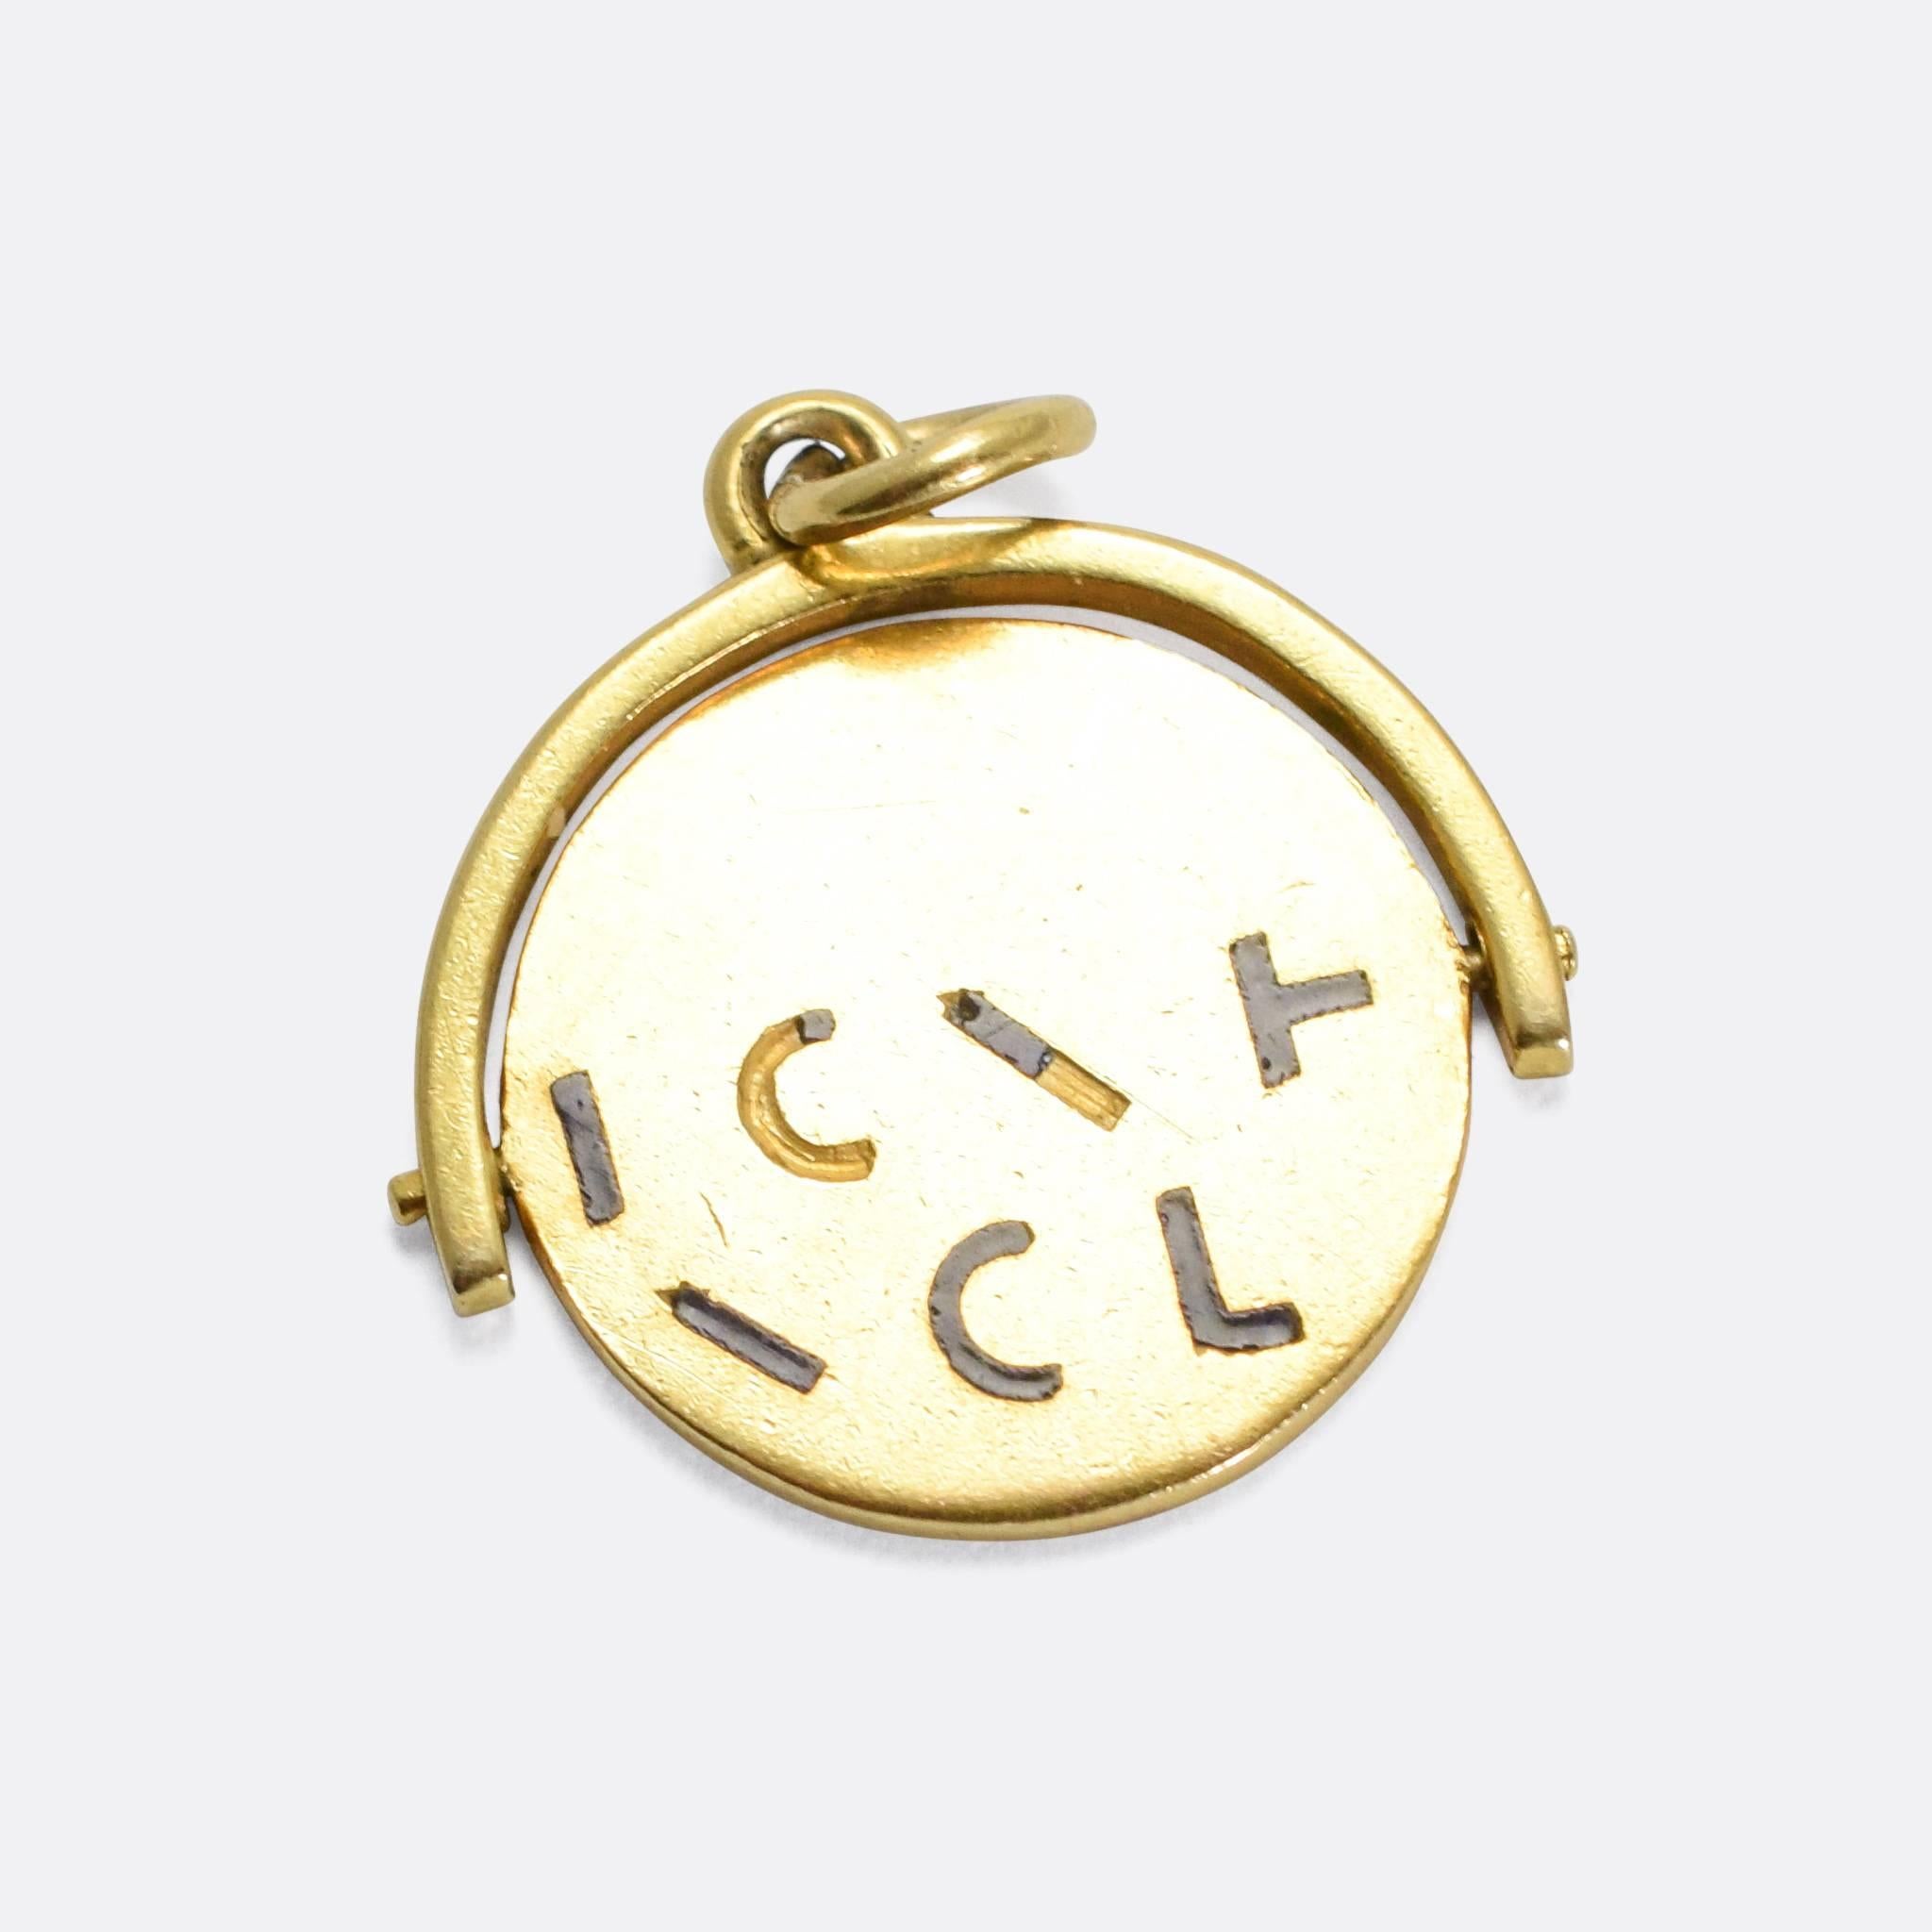 A sweet vintage spinner charm pendant. Each face has different letter components, such that when viewed on its own the message is unintelligible. However, when the disk is spun the full message is revealed: 